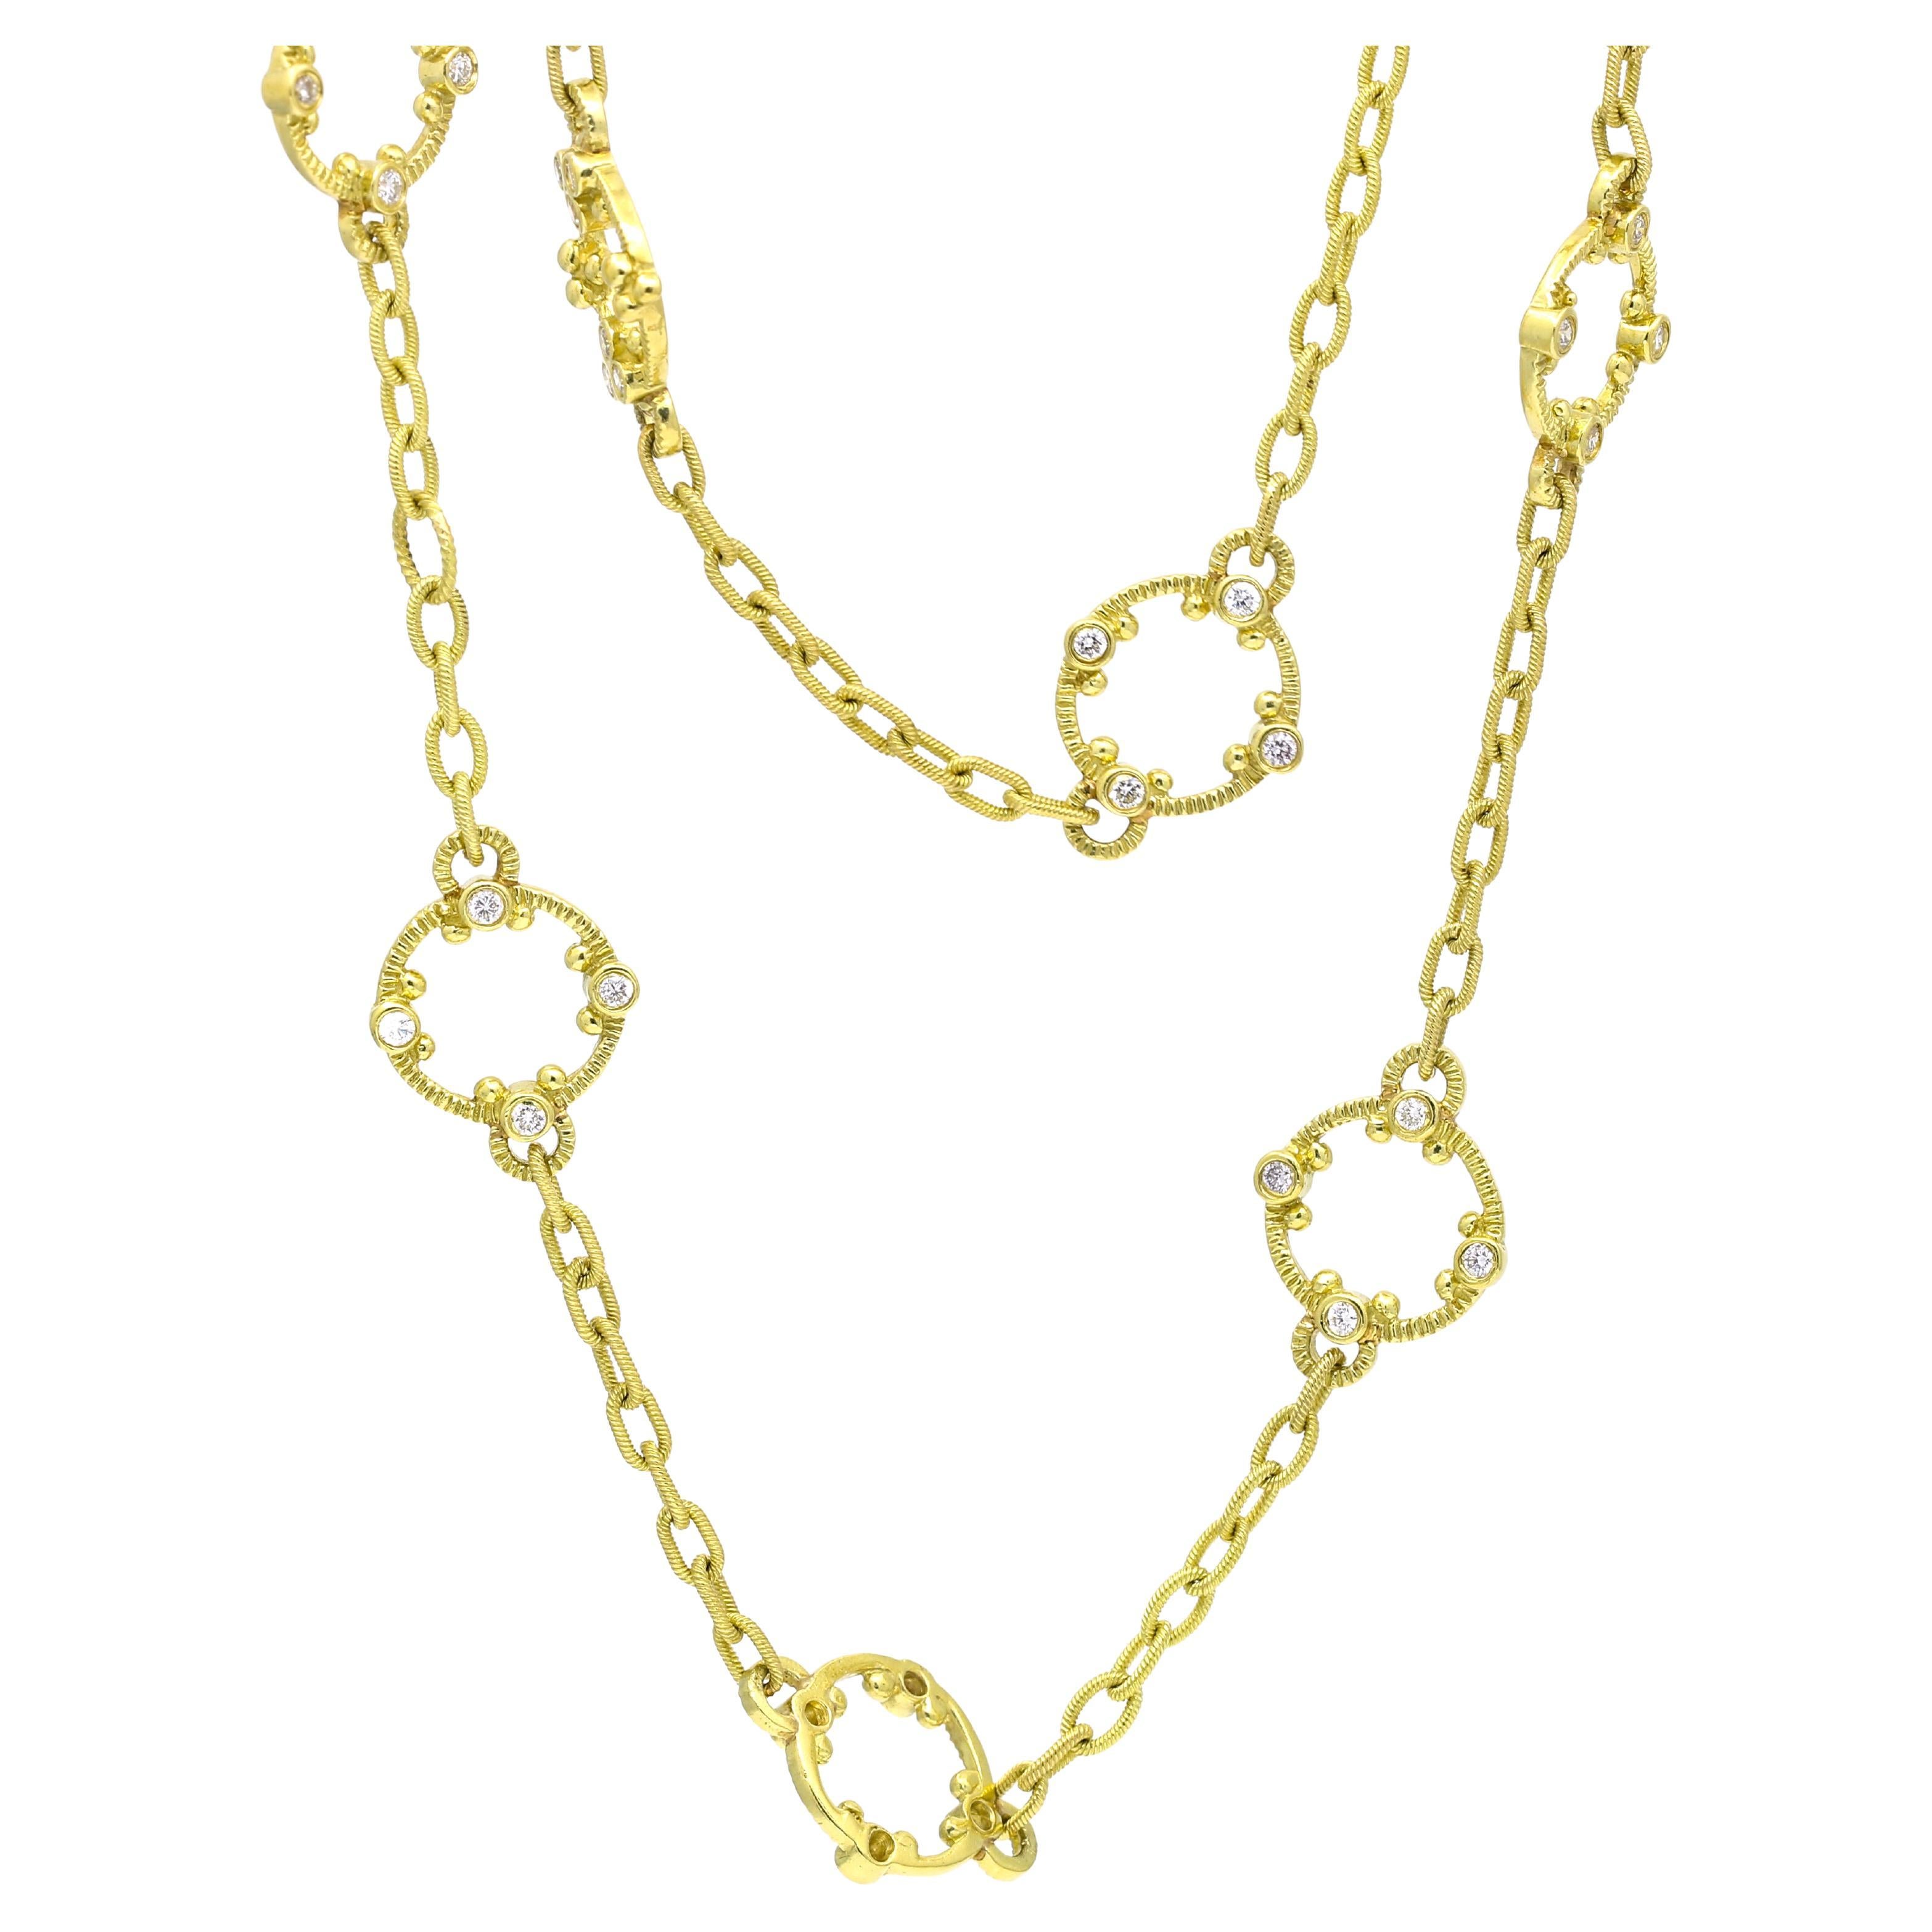 Women's Diamond Long Station Necklace - 18k Yellow Gold, 36" For Sale